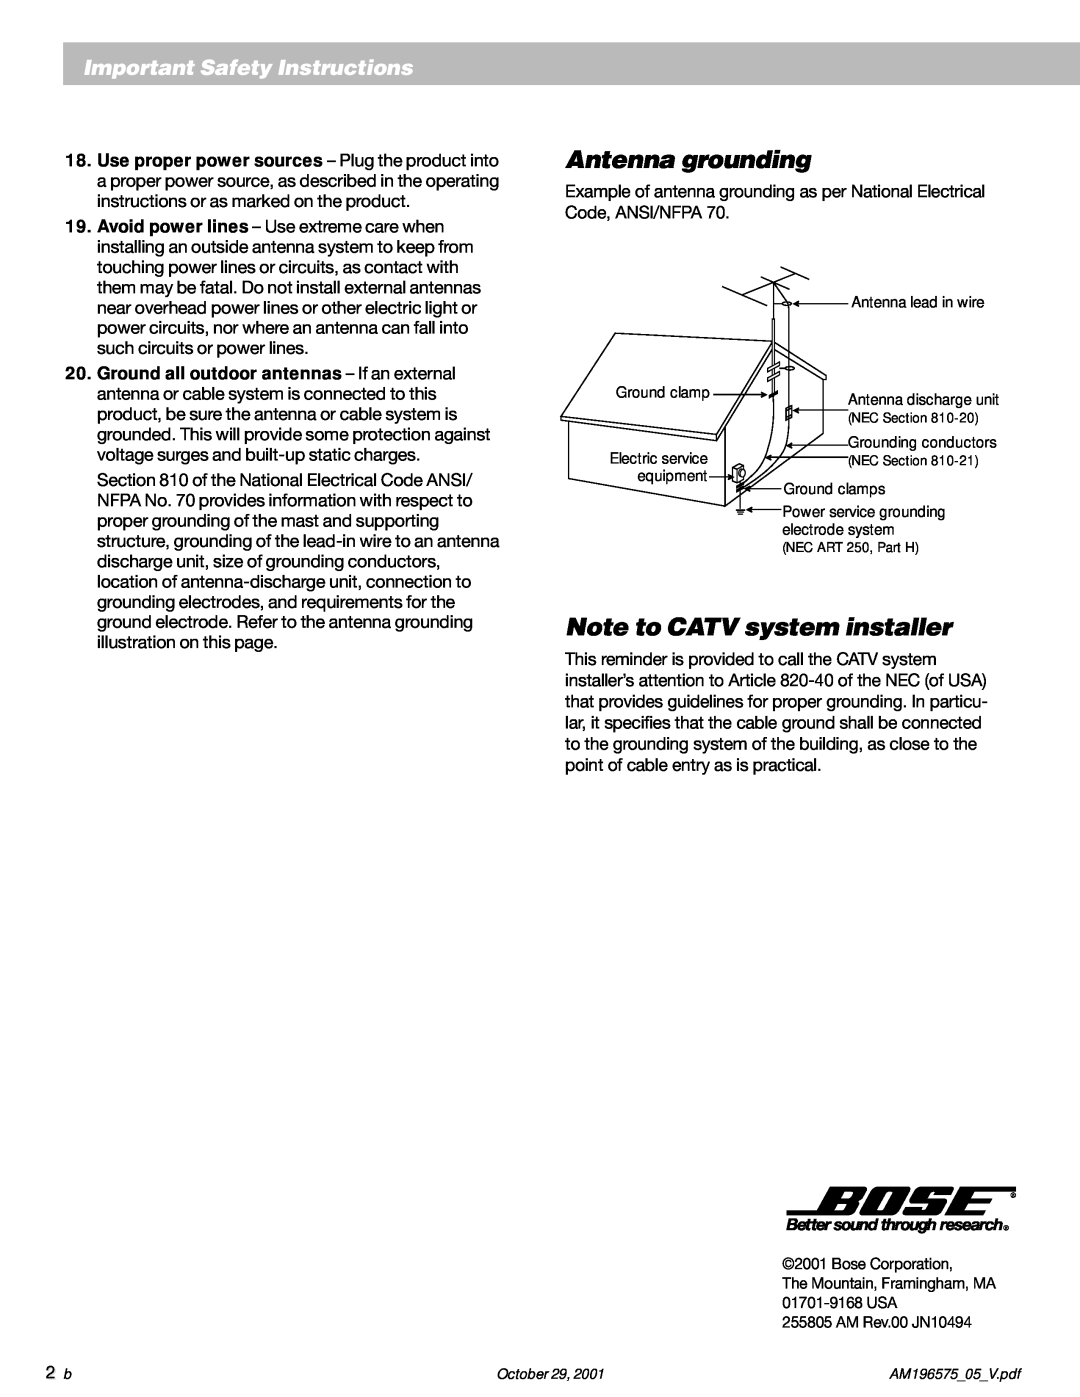 Bose 25 Series II manual Antenna grounding, Note to CATV system installer, Important Safety Instructions 